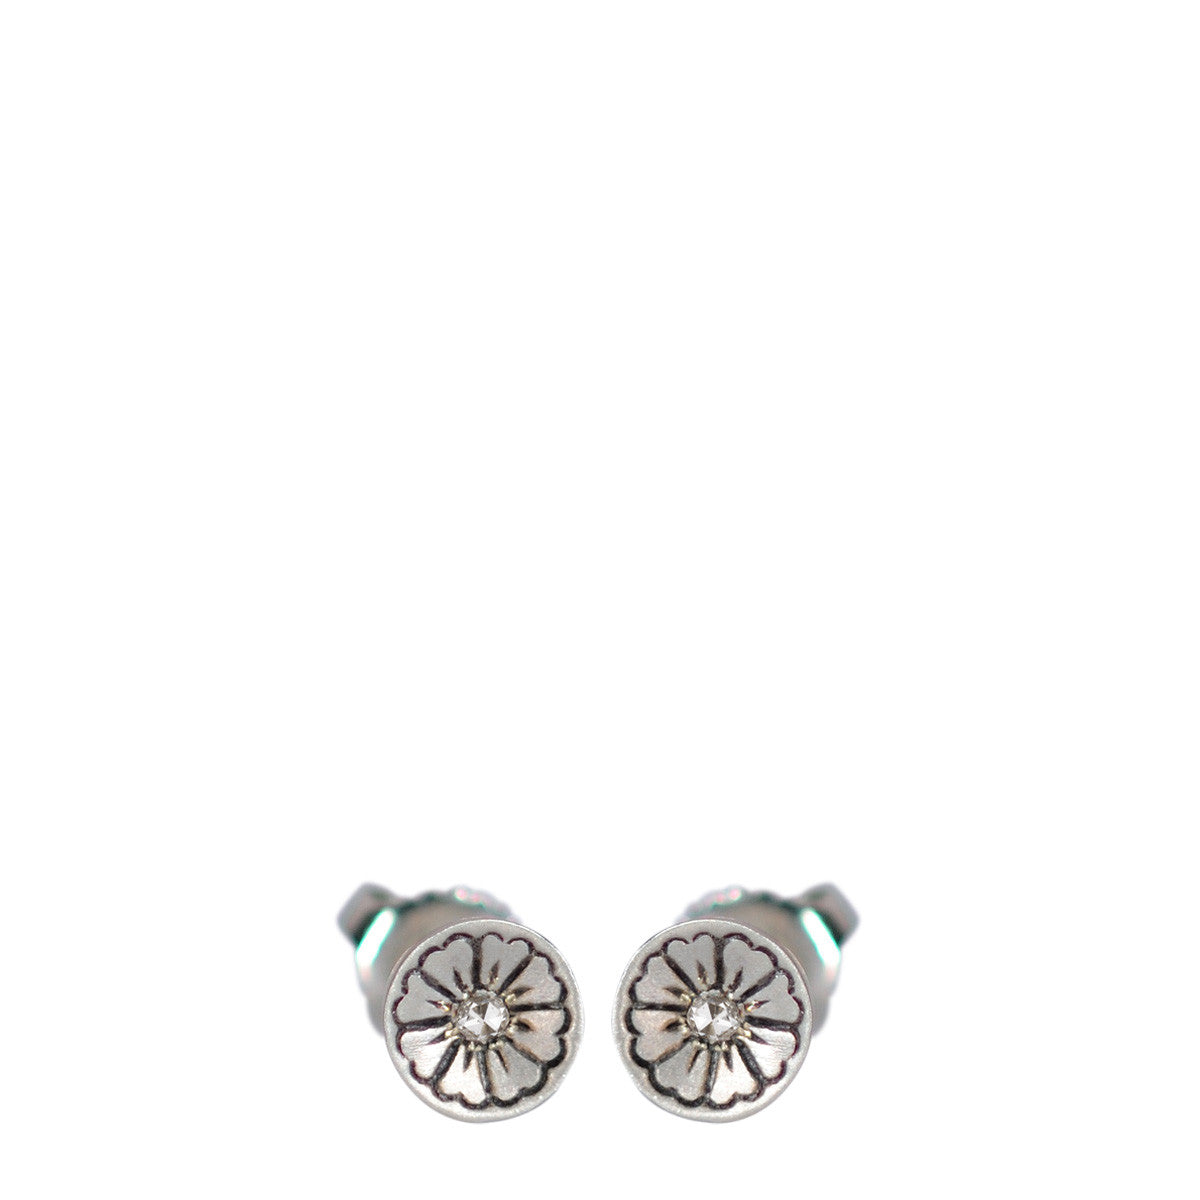 Sterling Silver Engraved Flower Stud Earrings with Diamonds